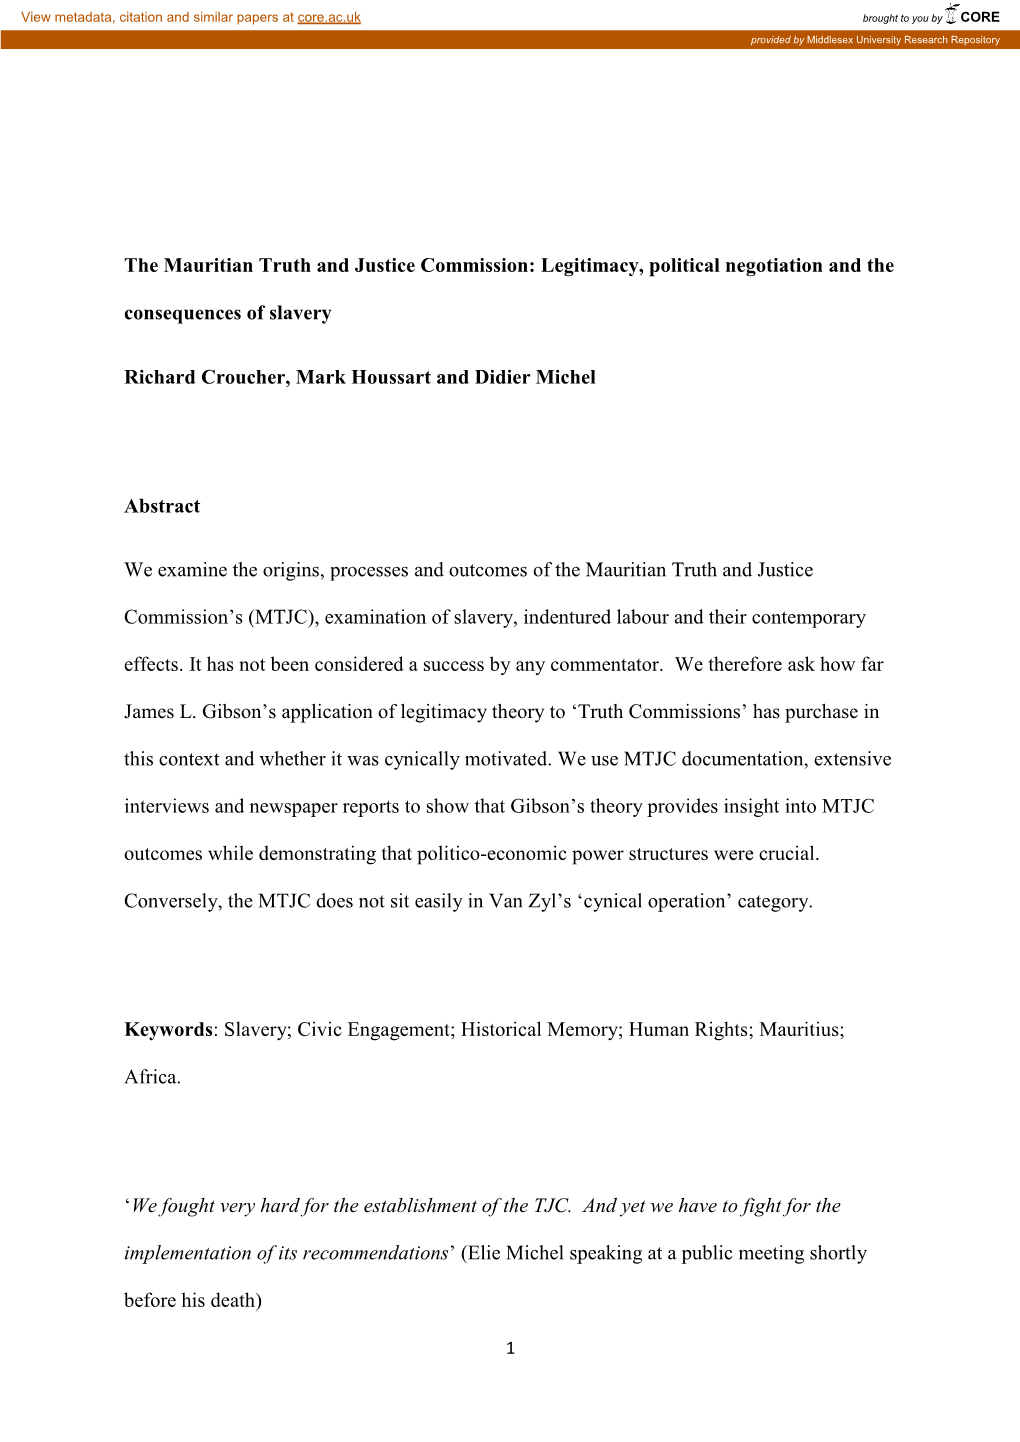 The Mauritian Truth and Justice Commission: Legitimacy, Political Negotiation and The